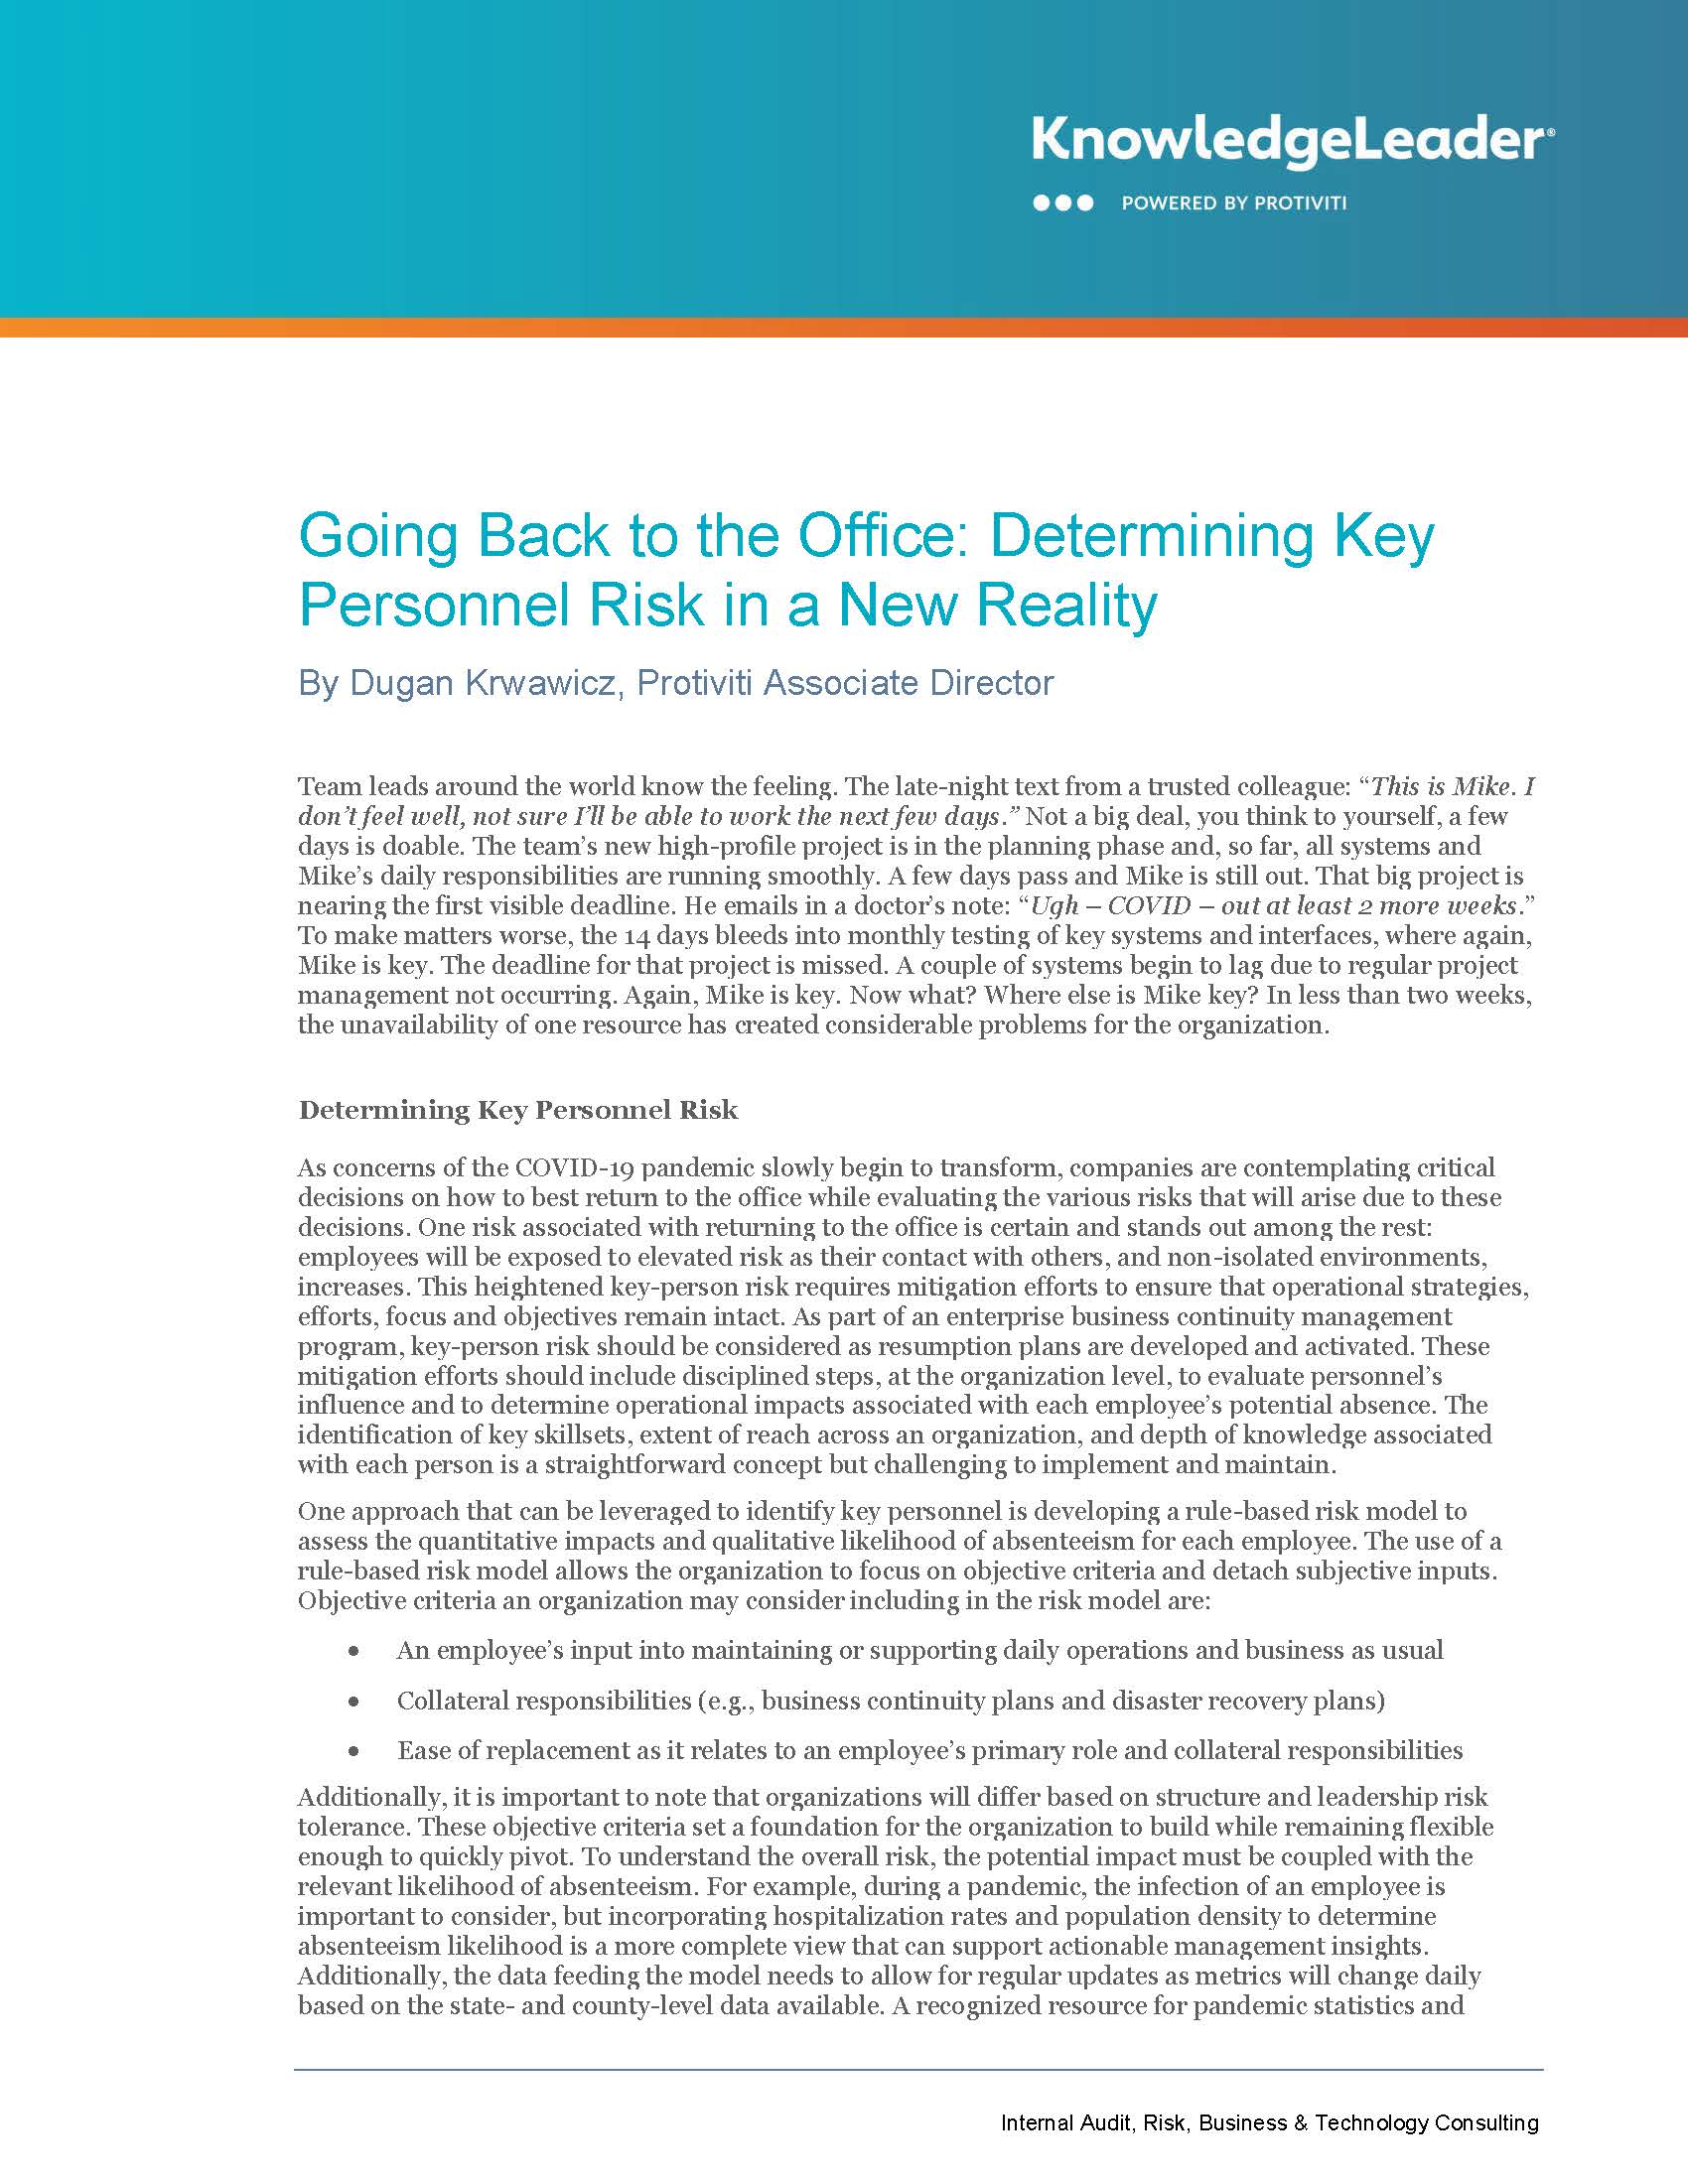 Screenshot of the first page of (Going Back to the Office: Determining Key Personnel Risk in a New Reality)